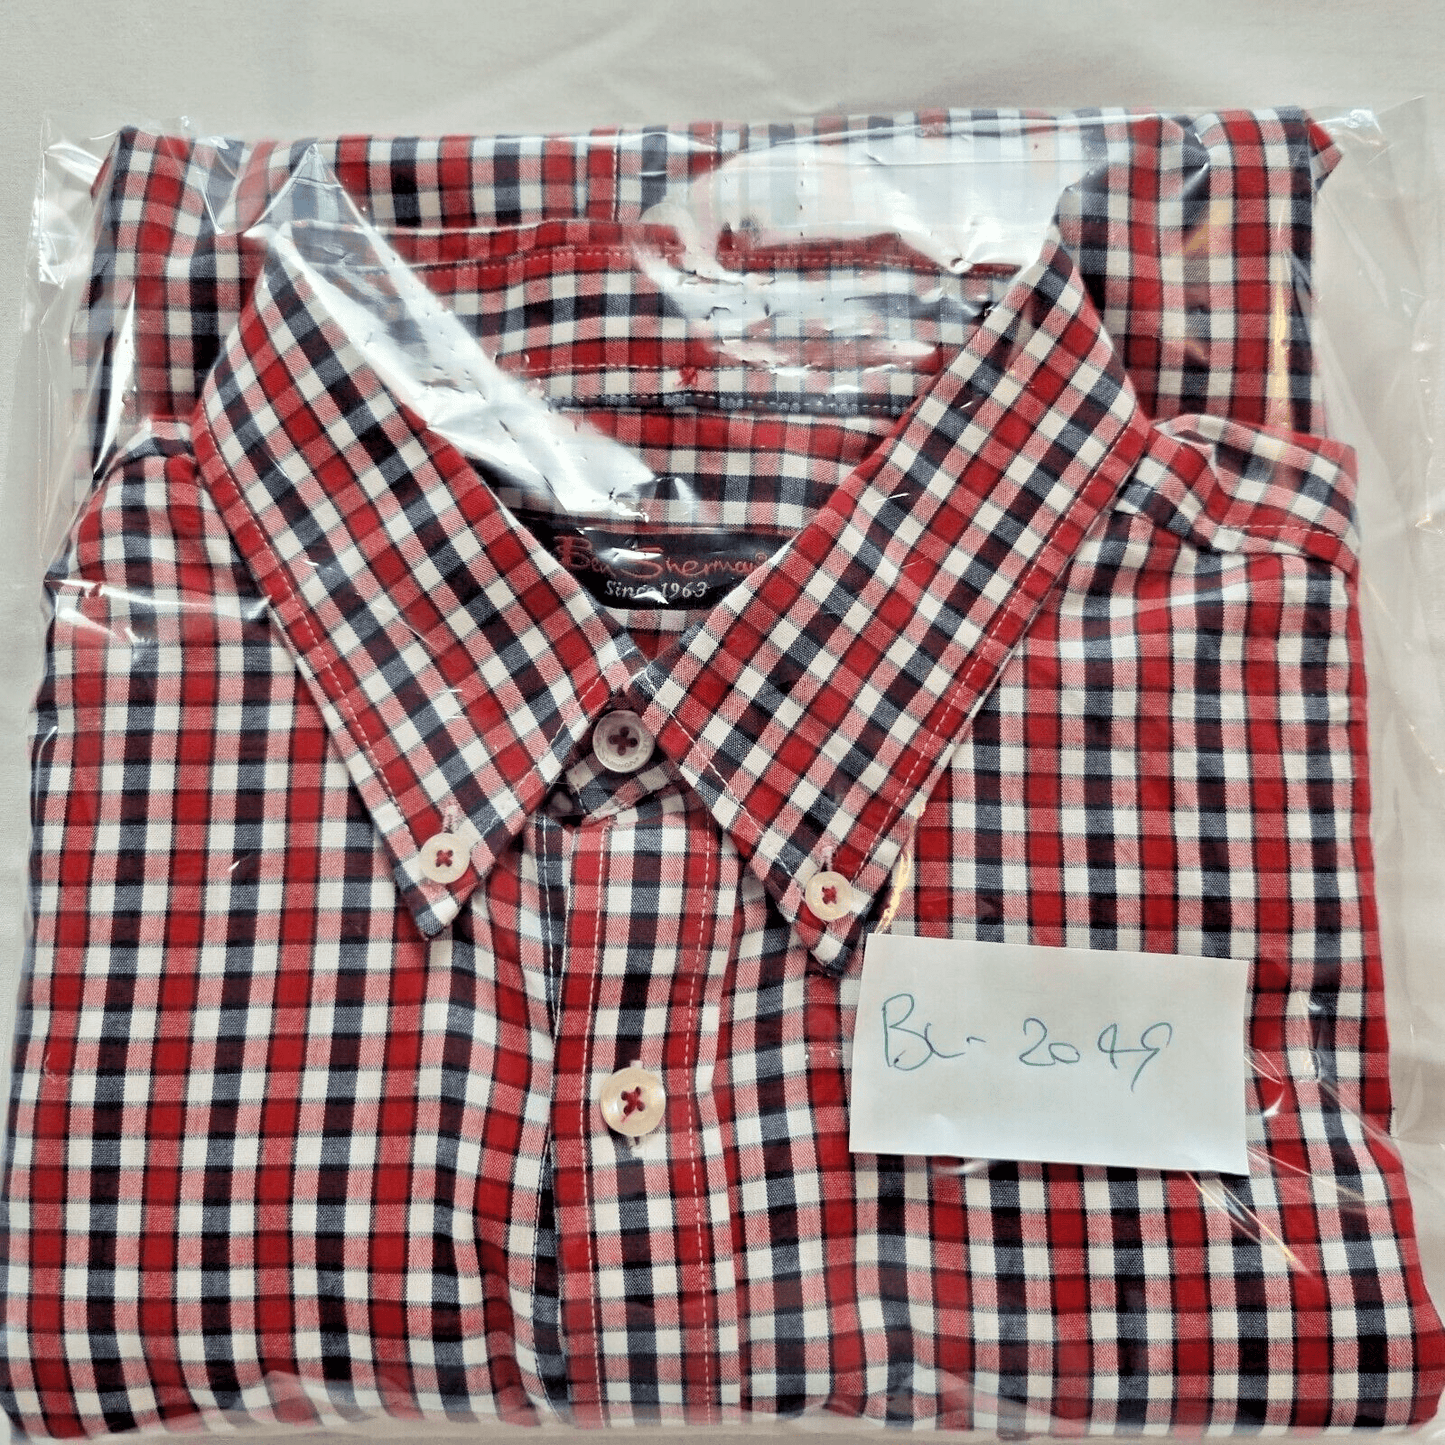 Ben Sherman Mens Shirt Long Sleeve Button Up Checked Blue Red White Excellent - Bonnie Lassio